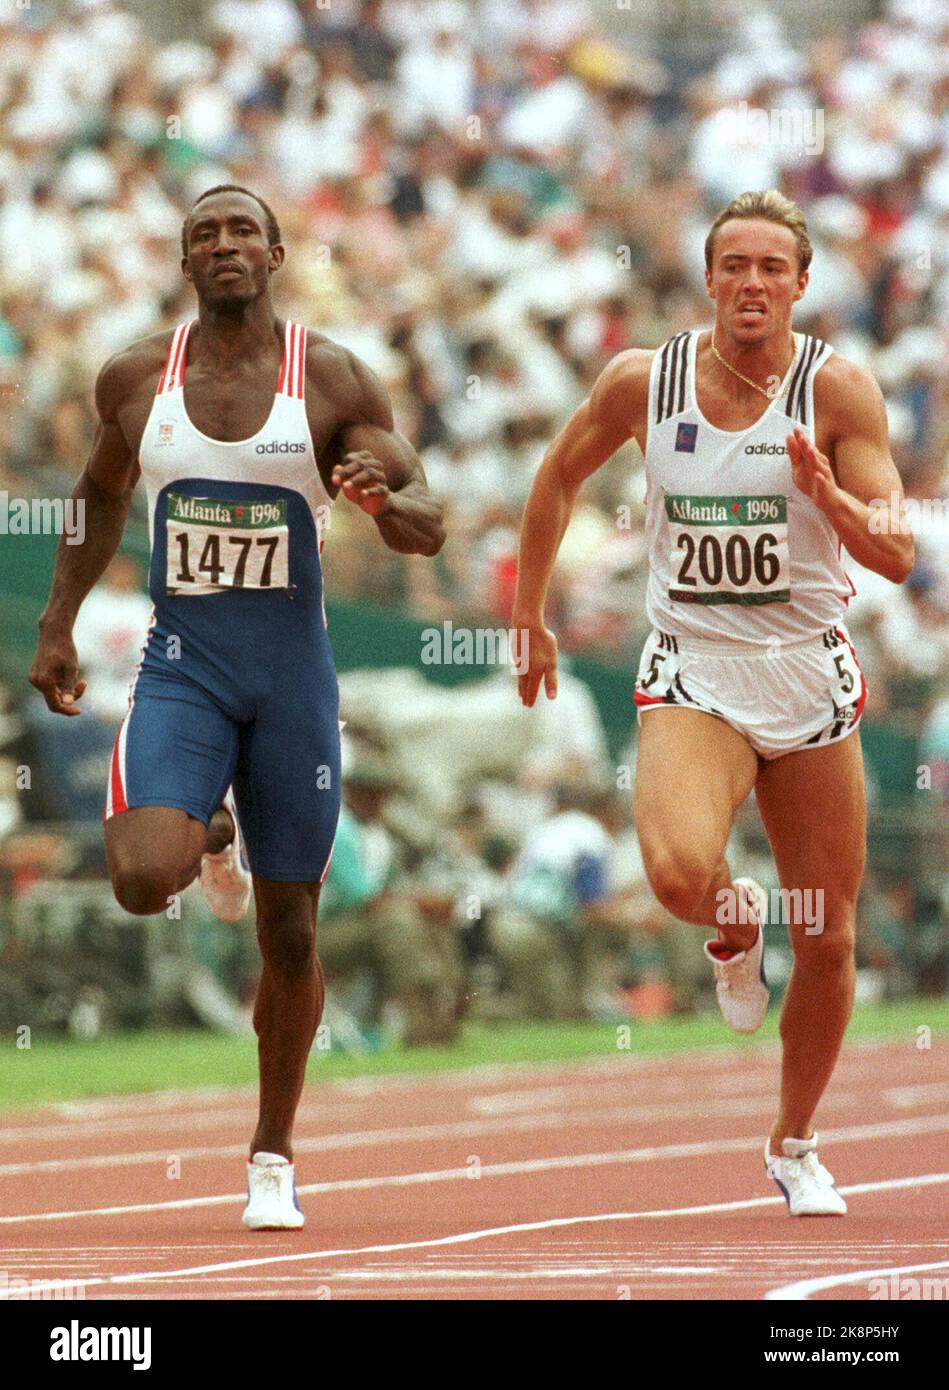 Atlanta 19960731: Geir Moen qualified with an emergency scream for mid -heat of 200m on Wednesday. Linford Christie won the heat at 20.65. NTB-photo Bjørn Sigurdsøn / NTB Stock Photo